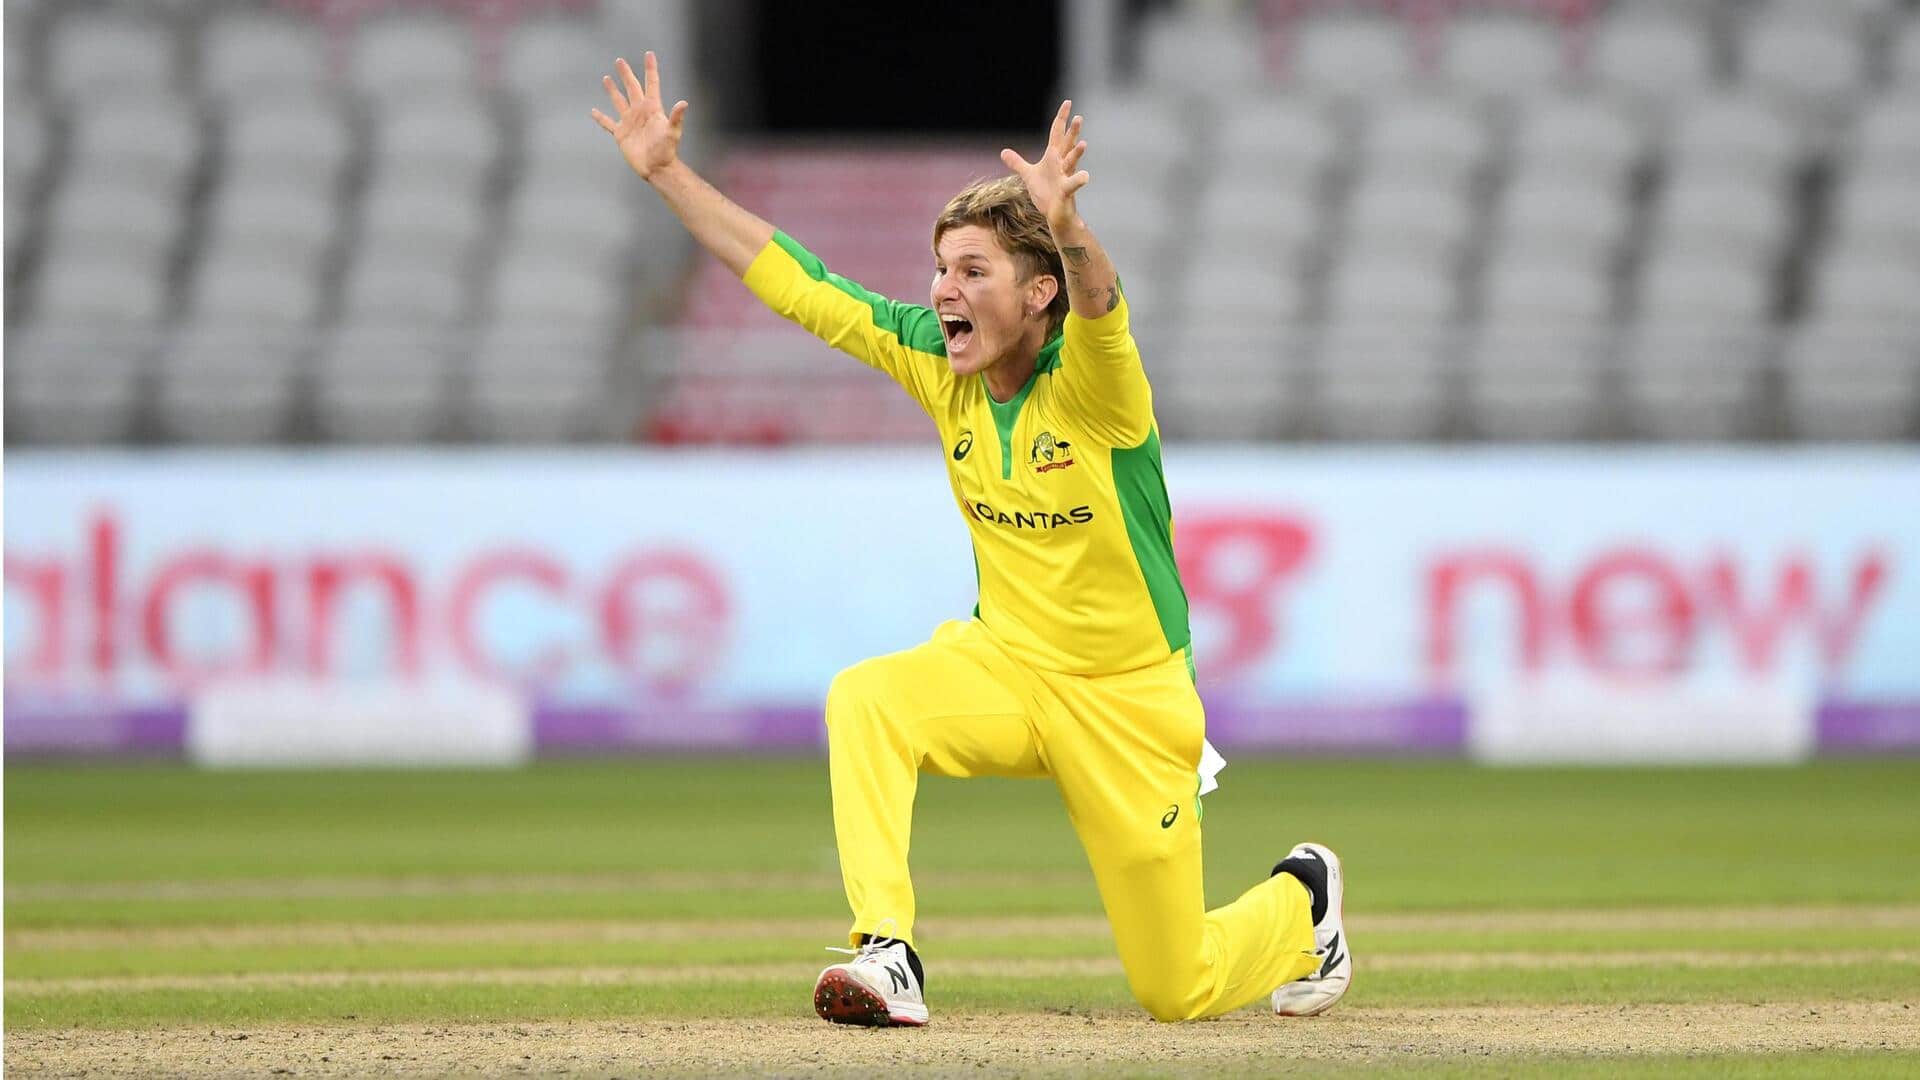 Adam Zampa accomplishes this World Cup feat for Australia